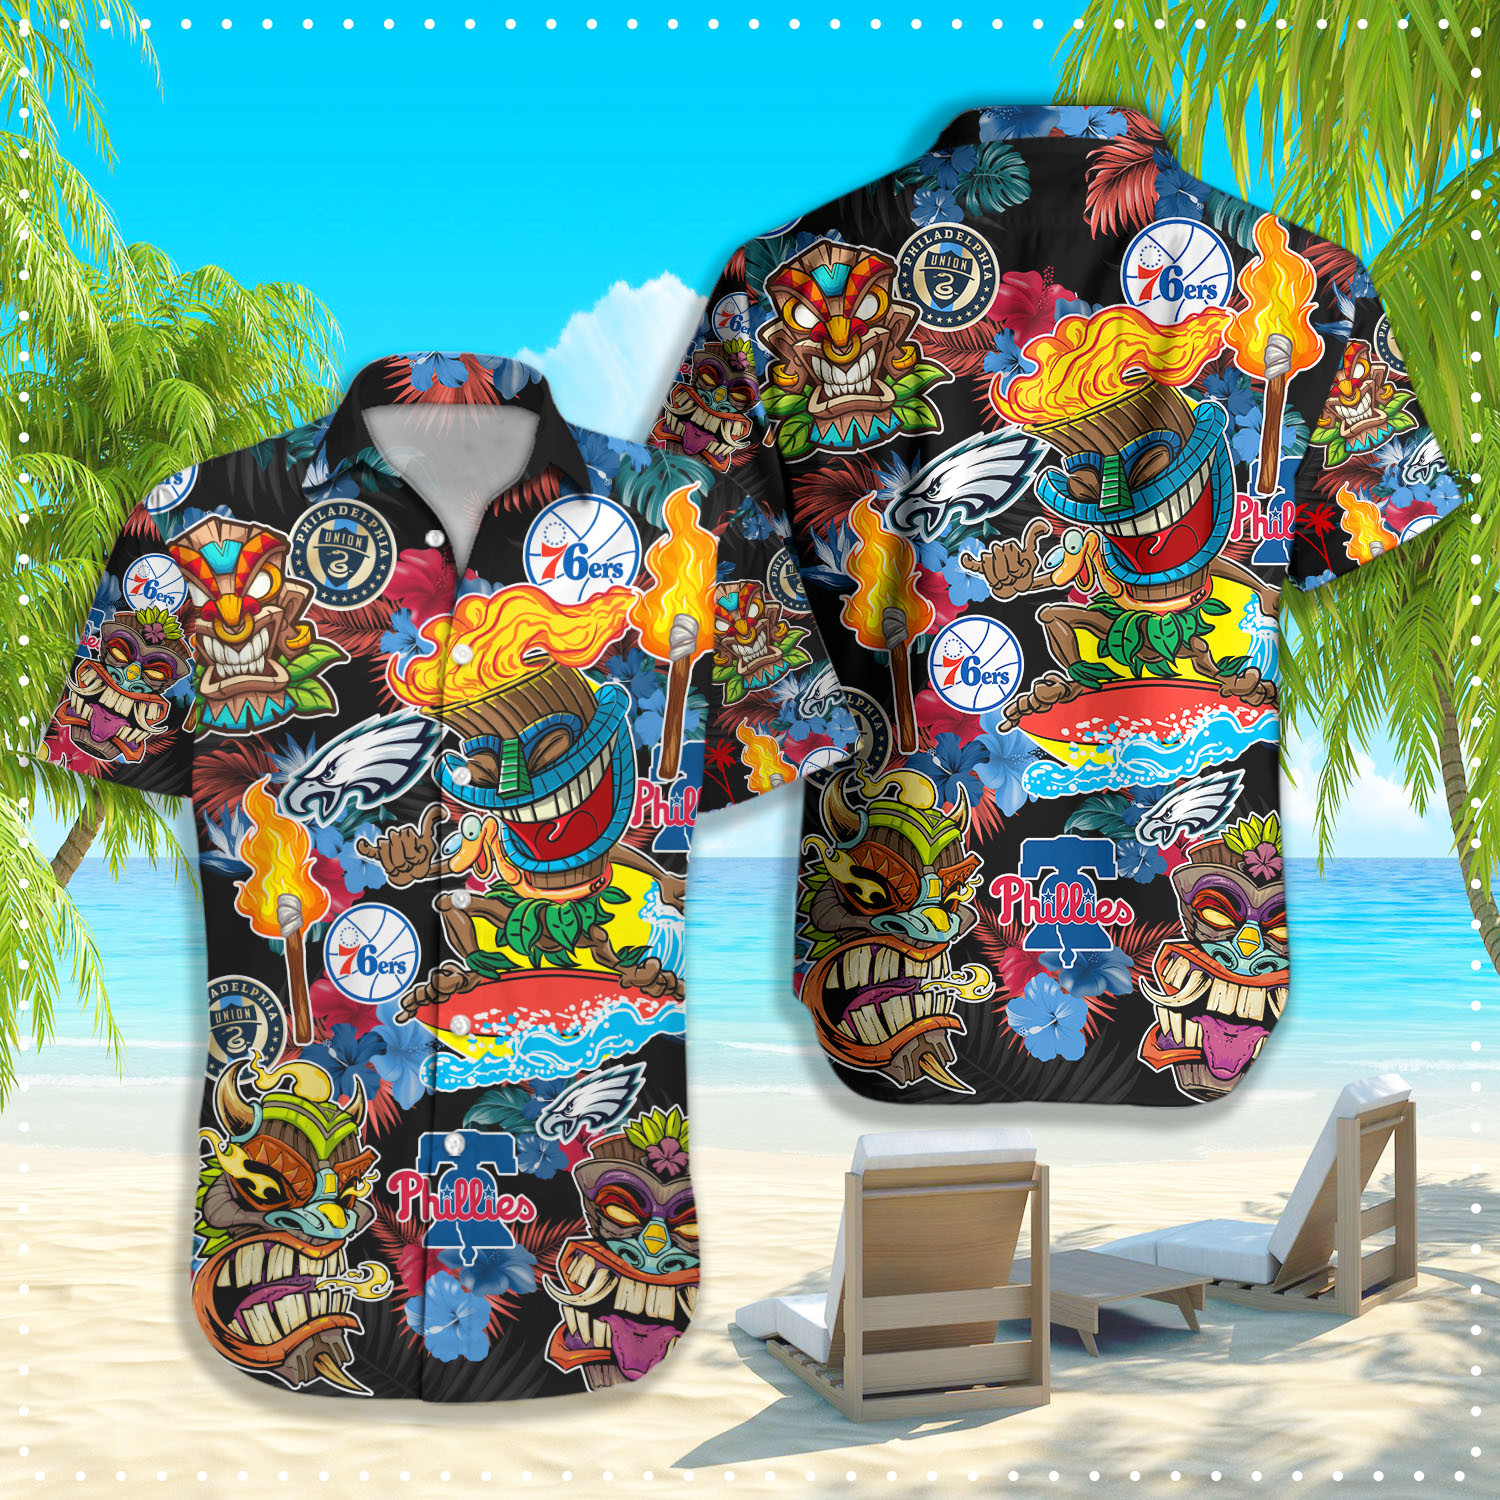 If you are looking for a one-of-a-kind shirt, check it out 207